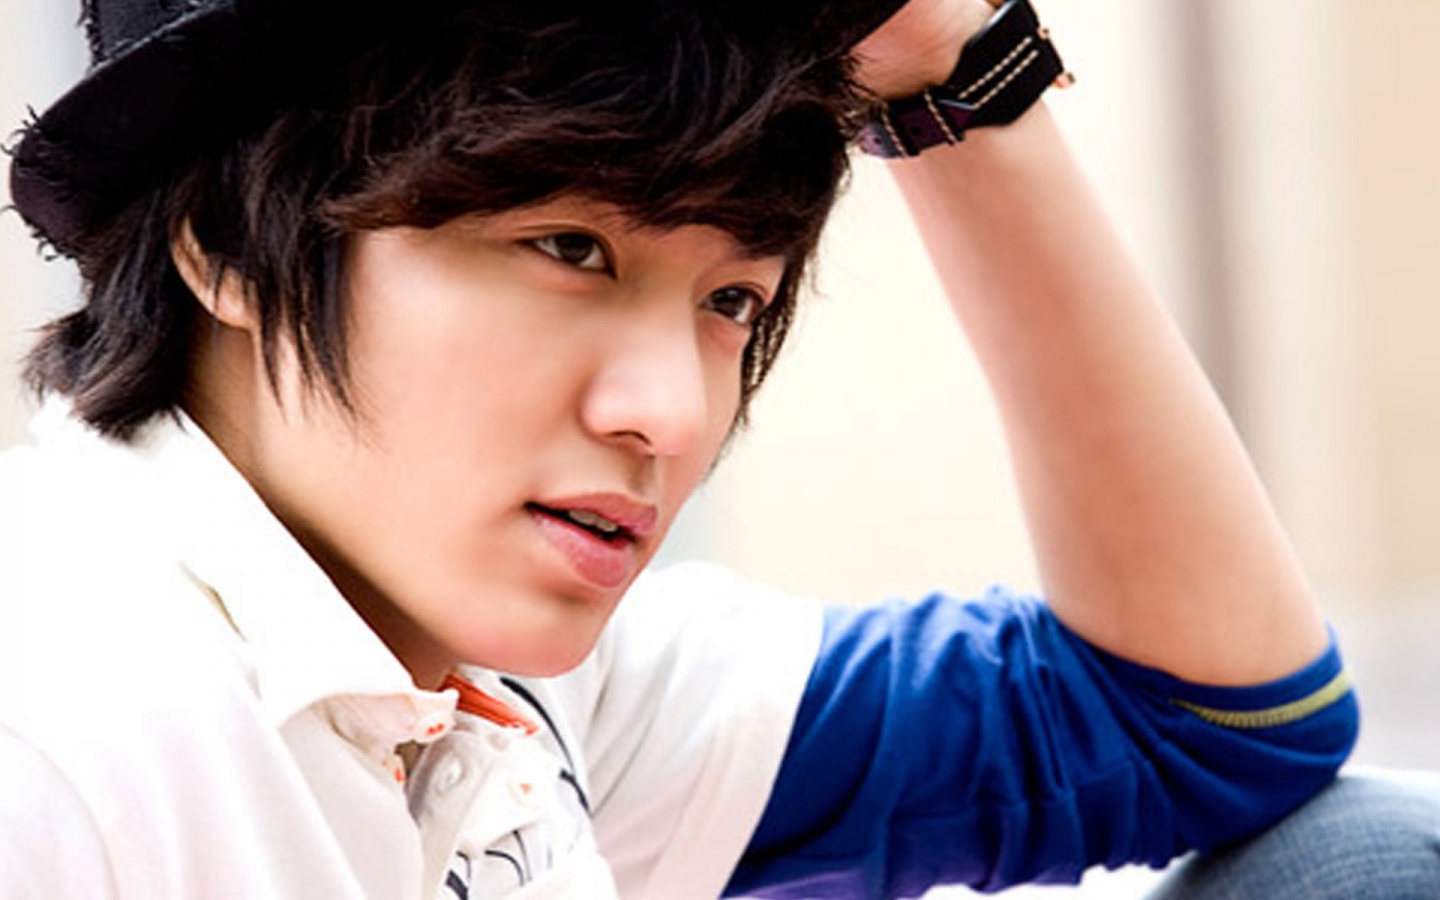 Lee Min Ho Profile Look for 1440 x 900 widescreen resolution